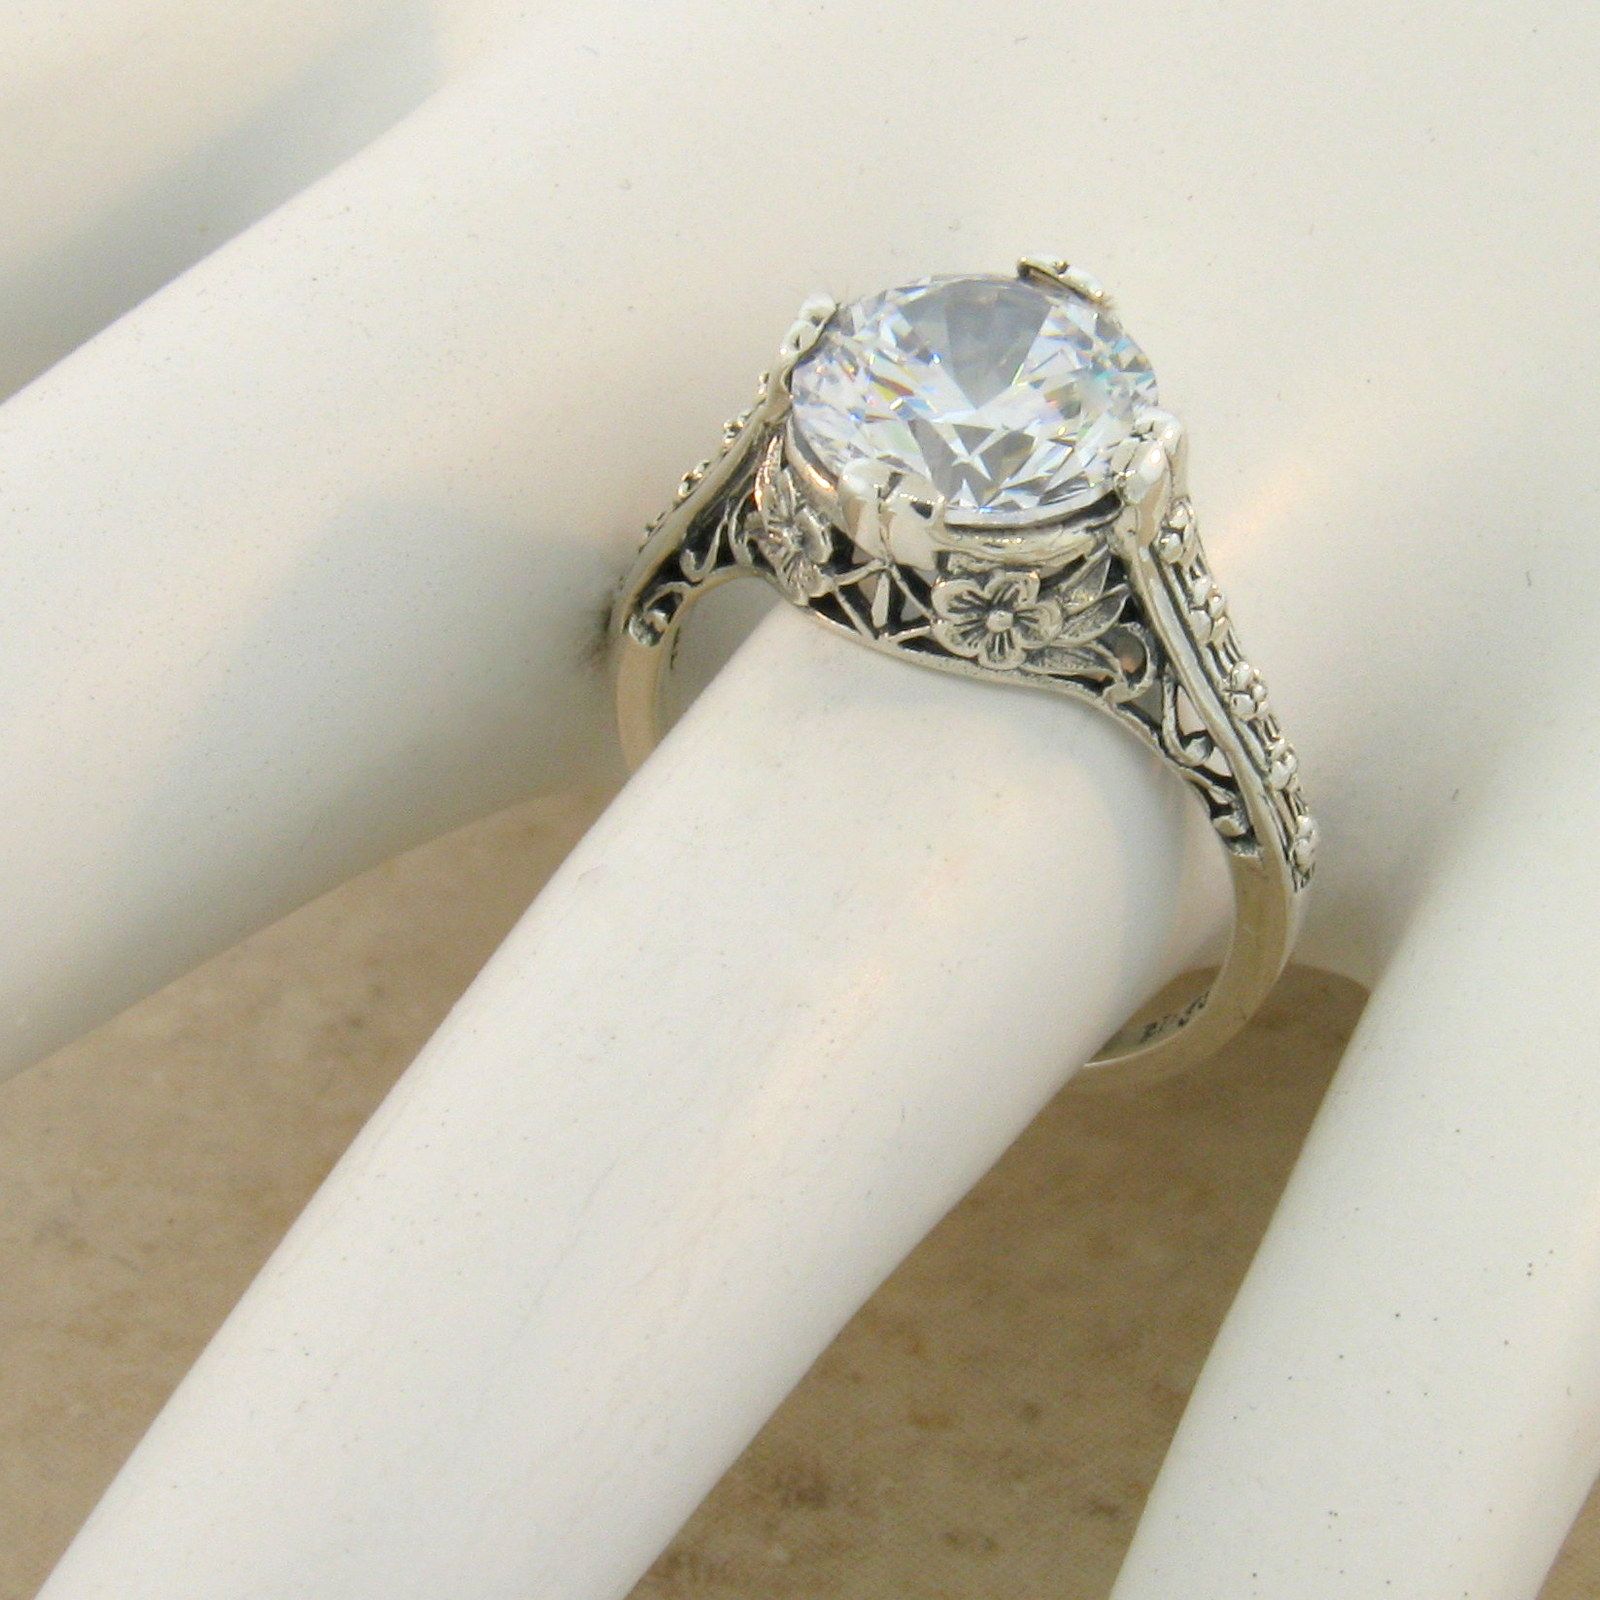 WEDDING ENGAGEMENT .925 STERLING SILVER ANTIQUE STYLE CZ RING SIZE 10